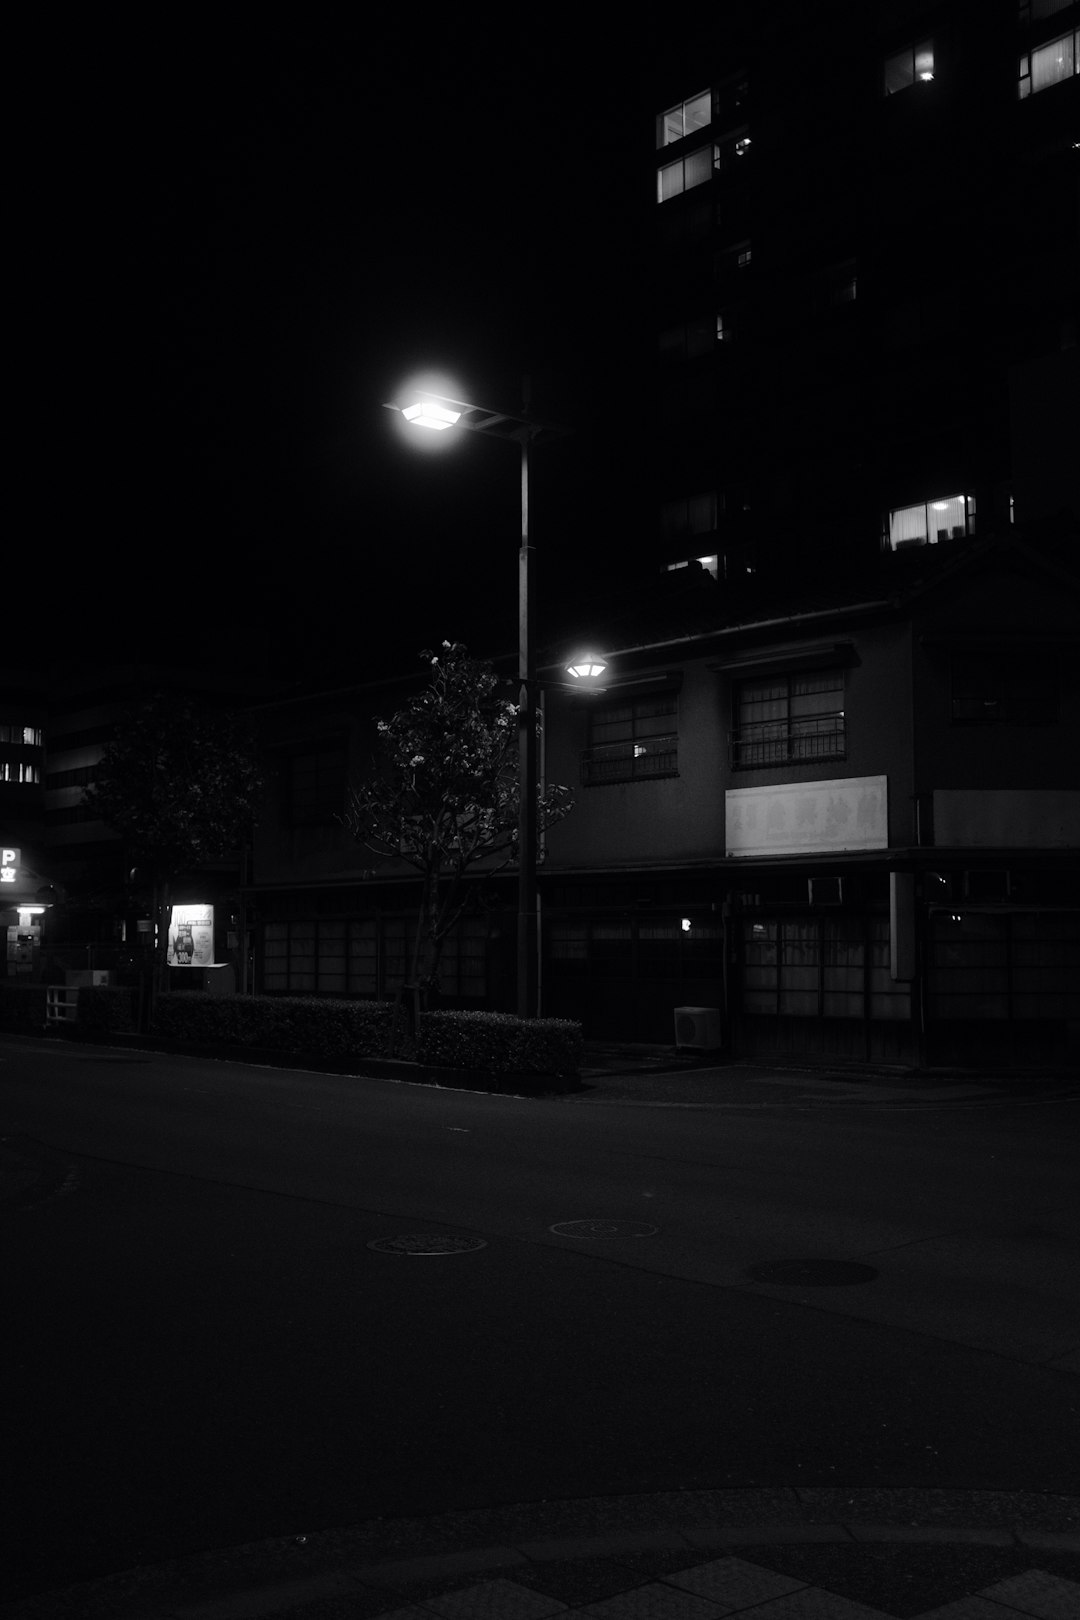 grayscale photo of street light turned on during nighttime